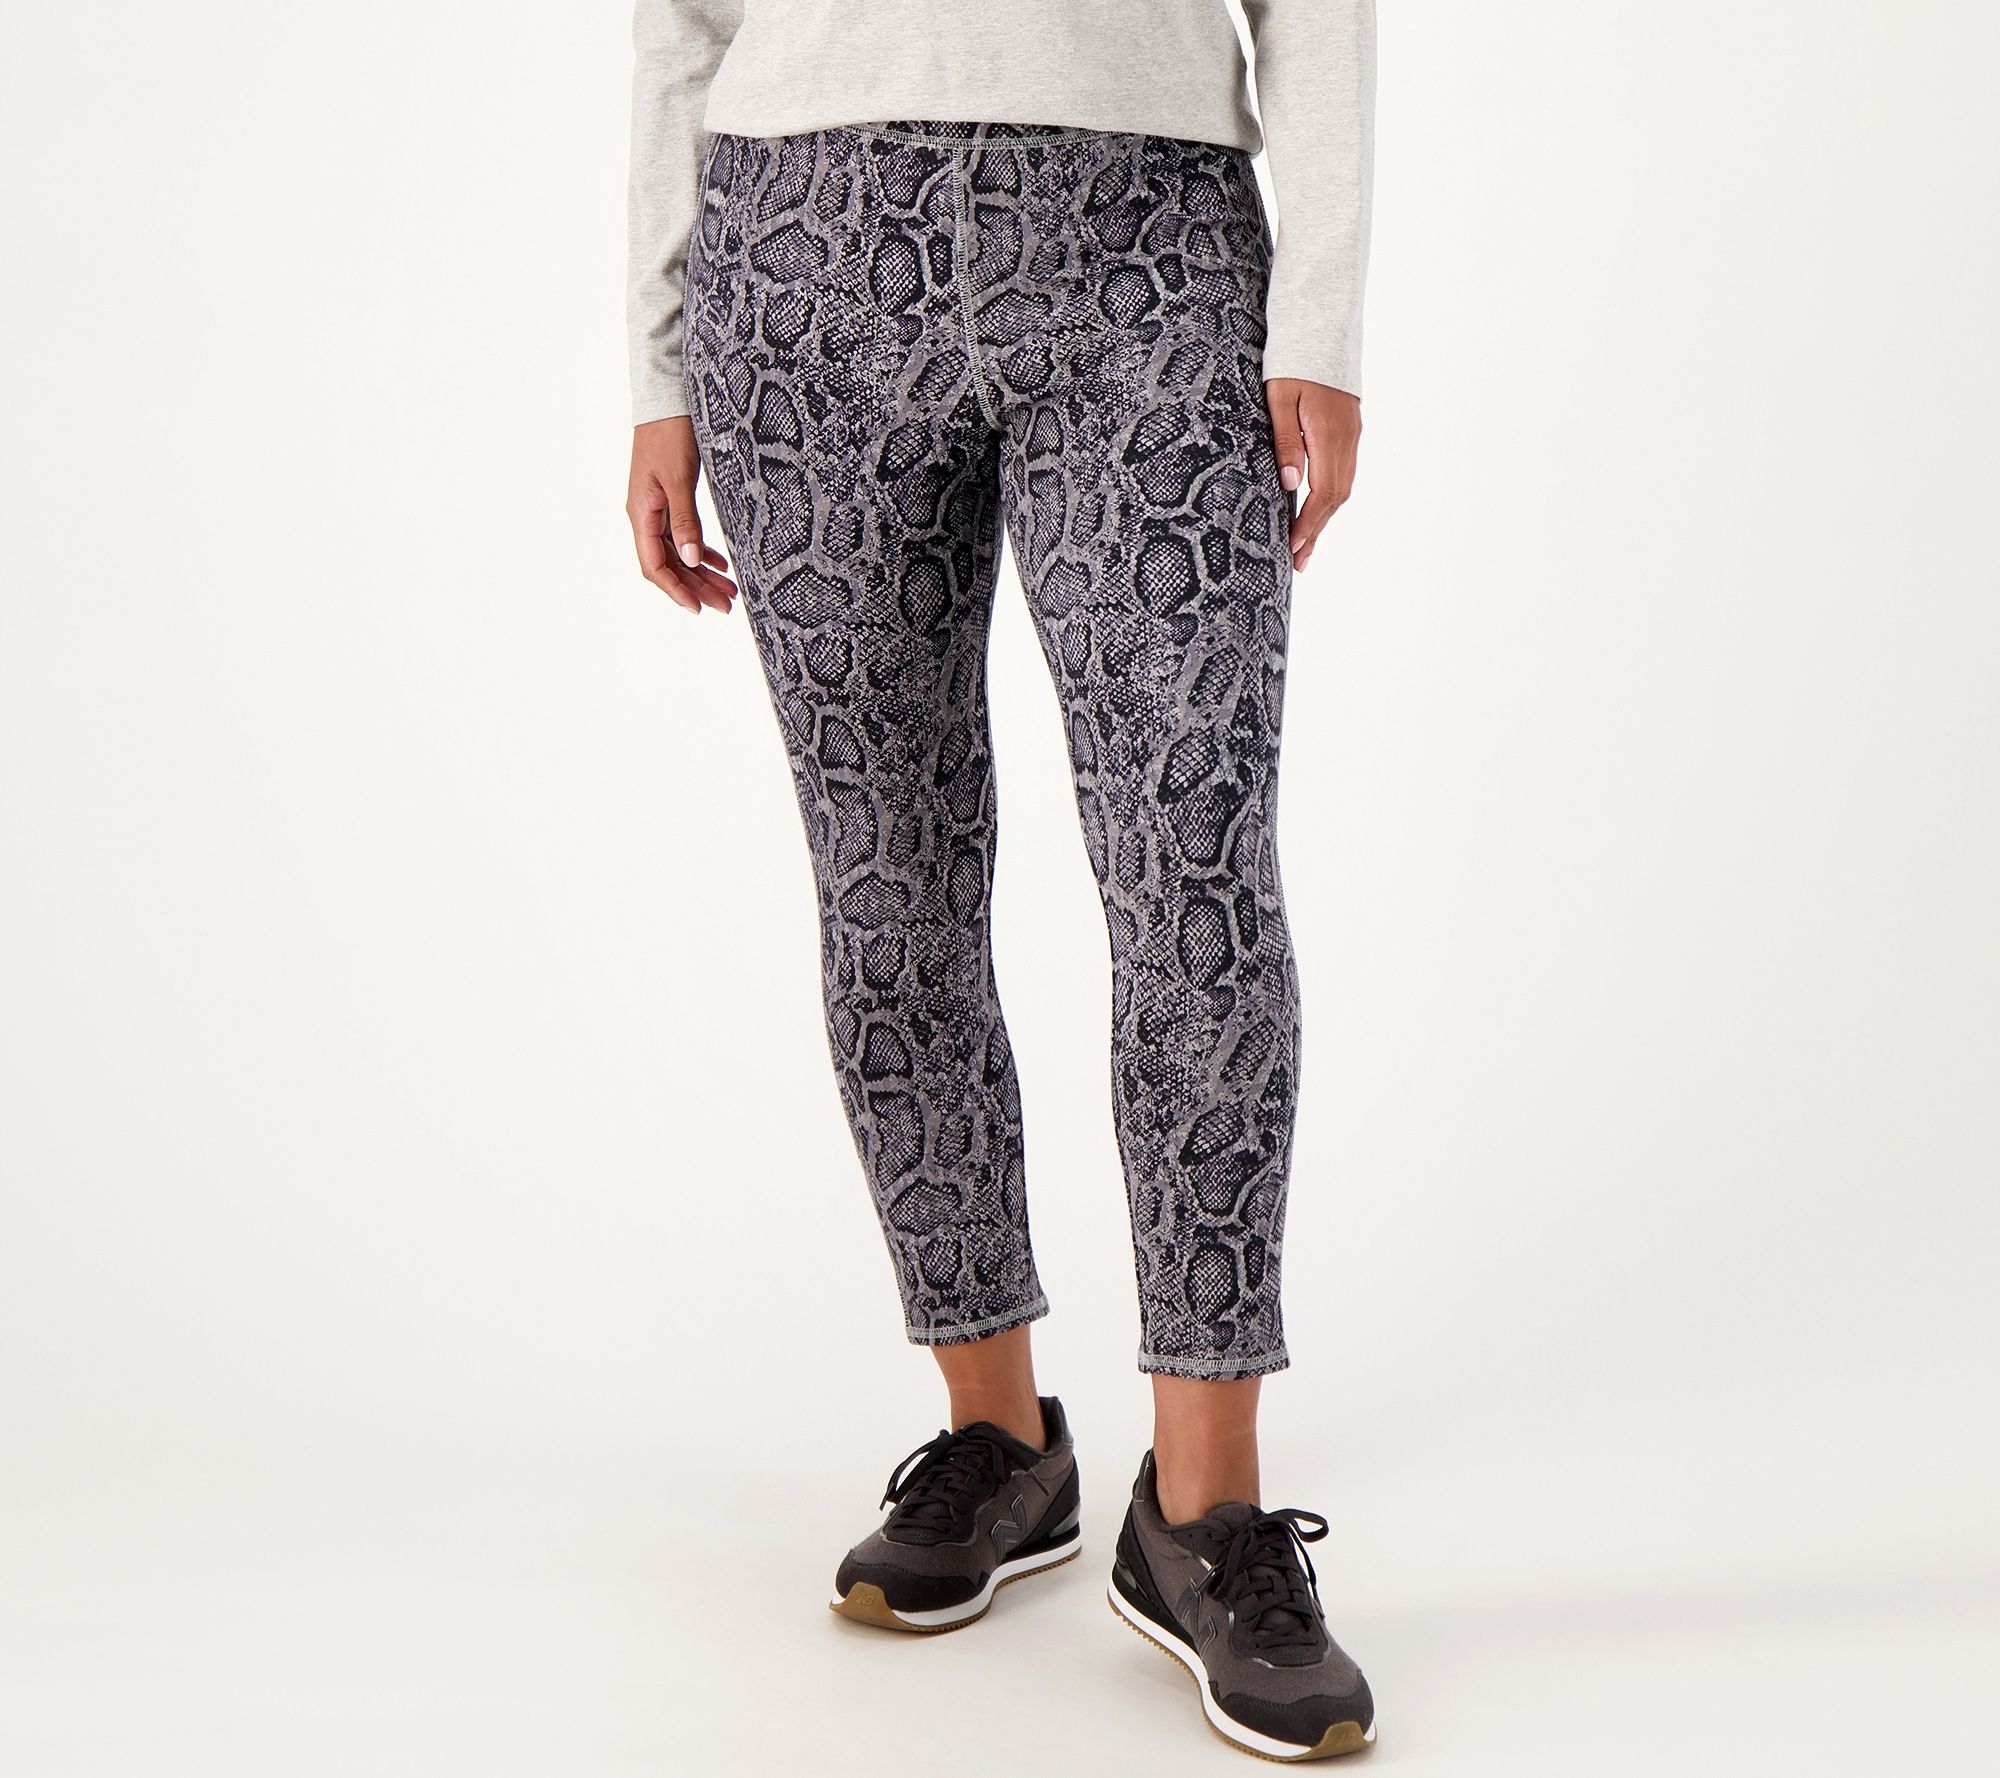 Denim & Co. Active Regular Printed Duo Stretch Legging with